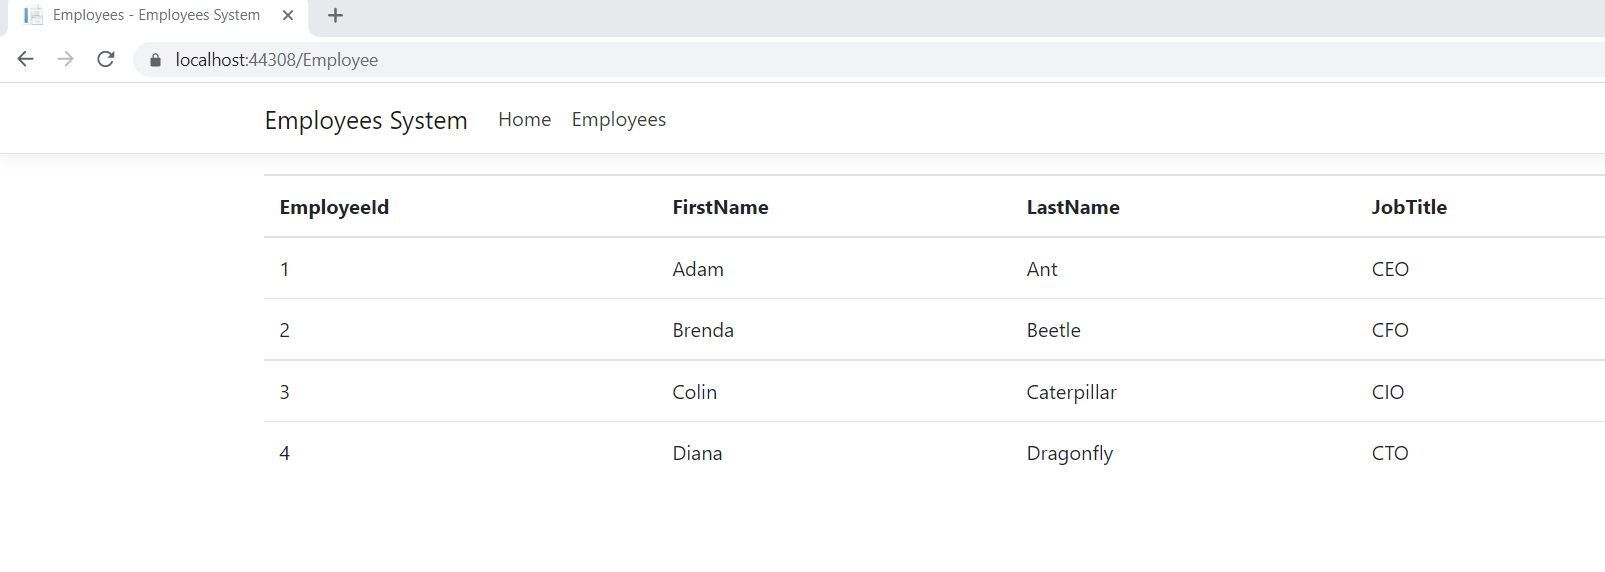 Table of employees in demo app.